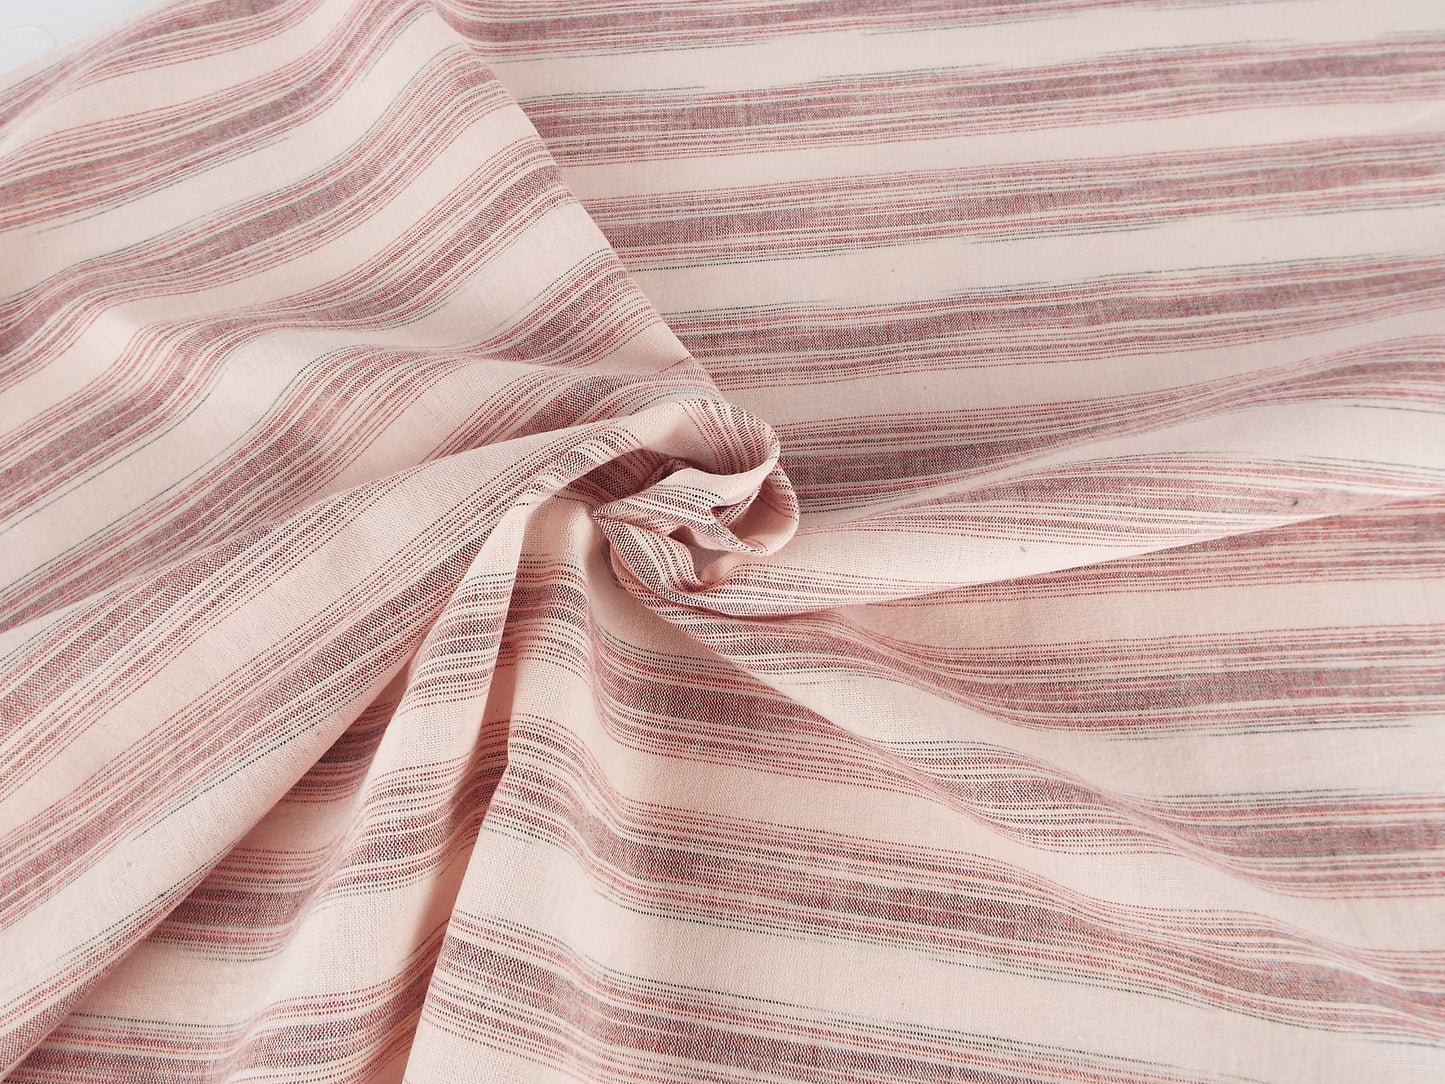 Kameda striped cotton fabric thin fabric # 102 ABCDEF 6 patterns